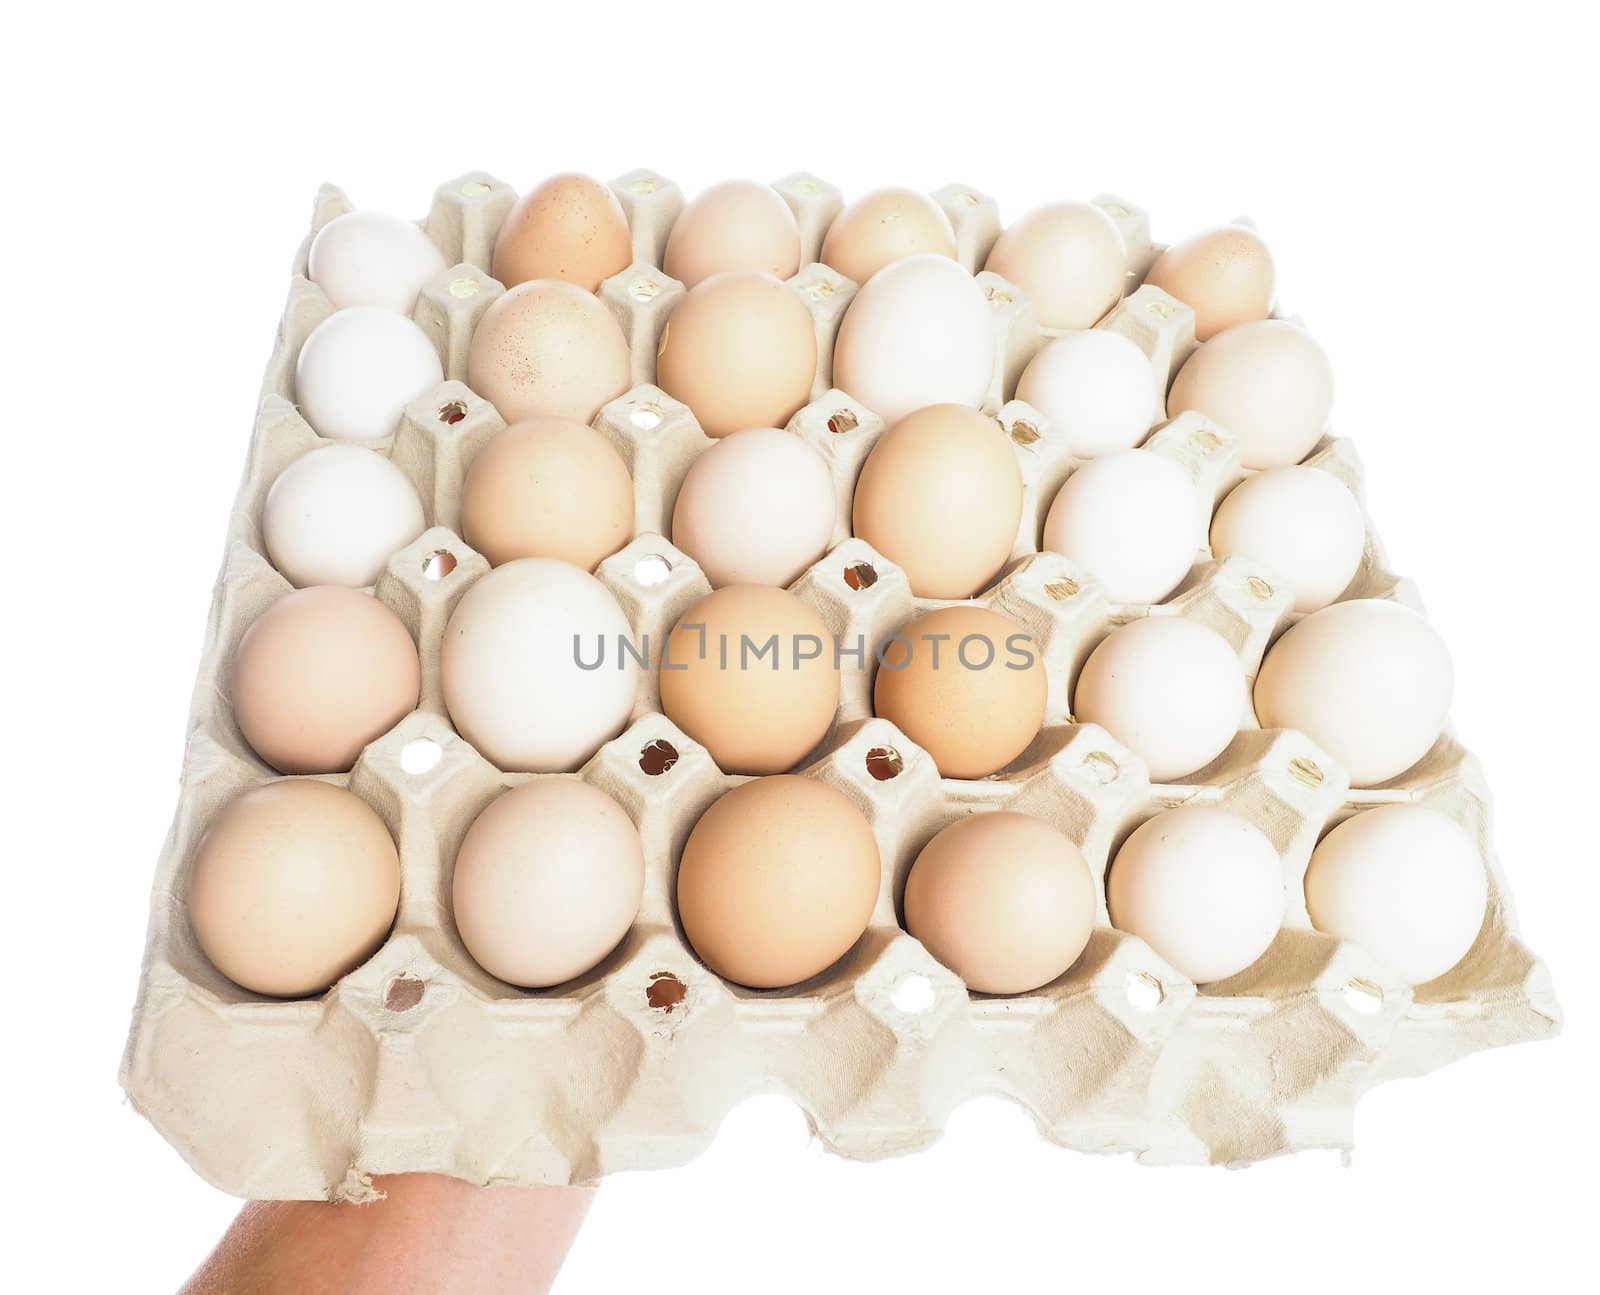 Farmed brown and white eggs in a container, isolated on white by Arvebettum